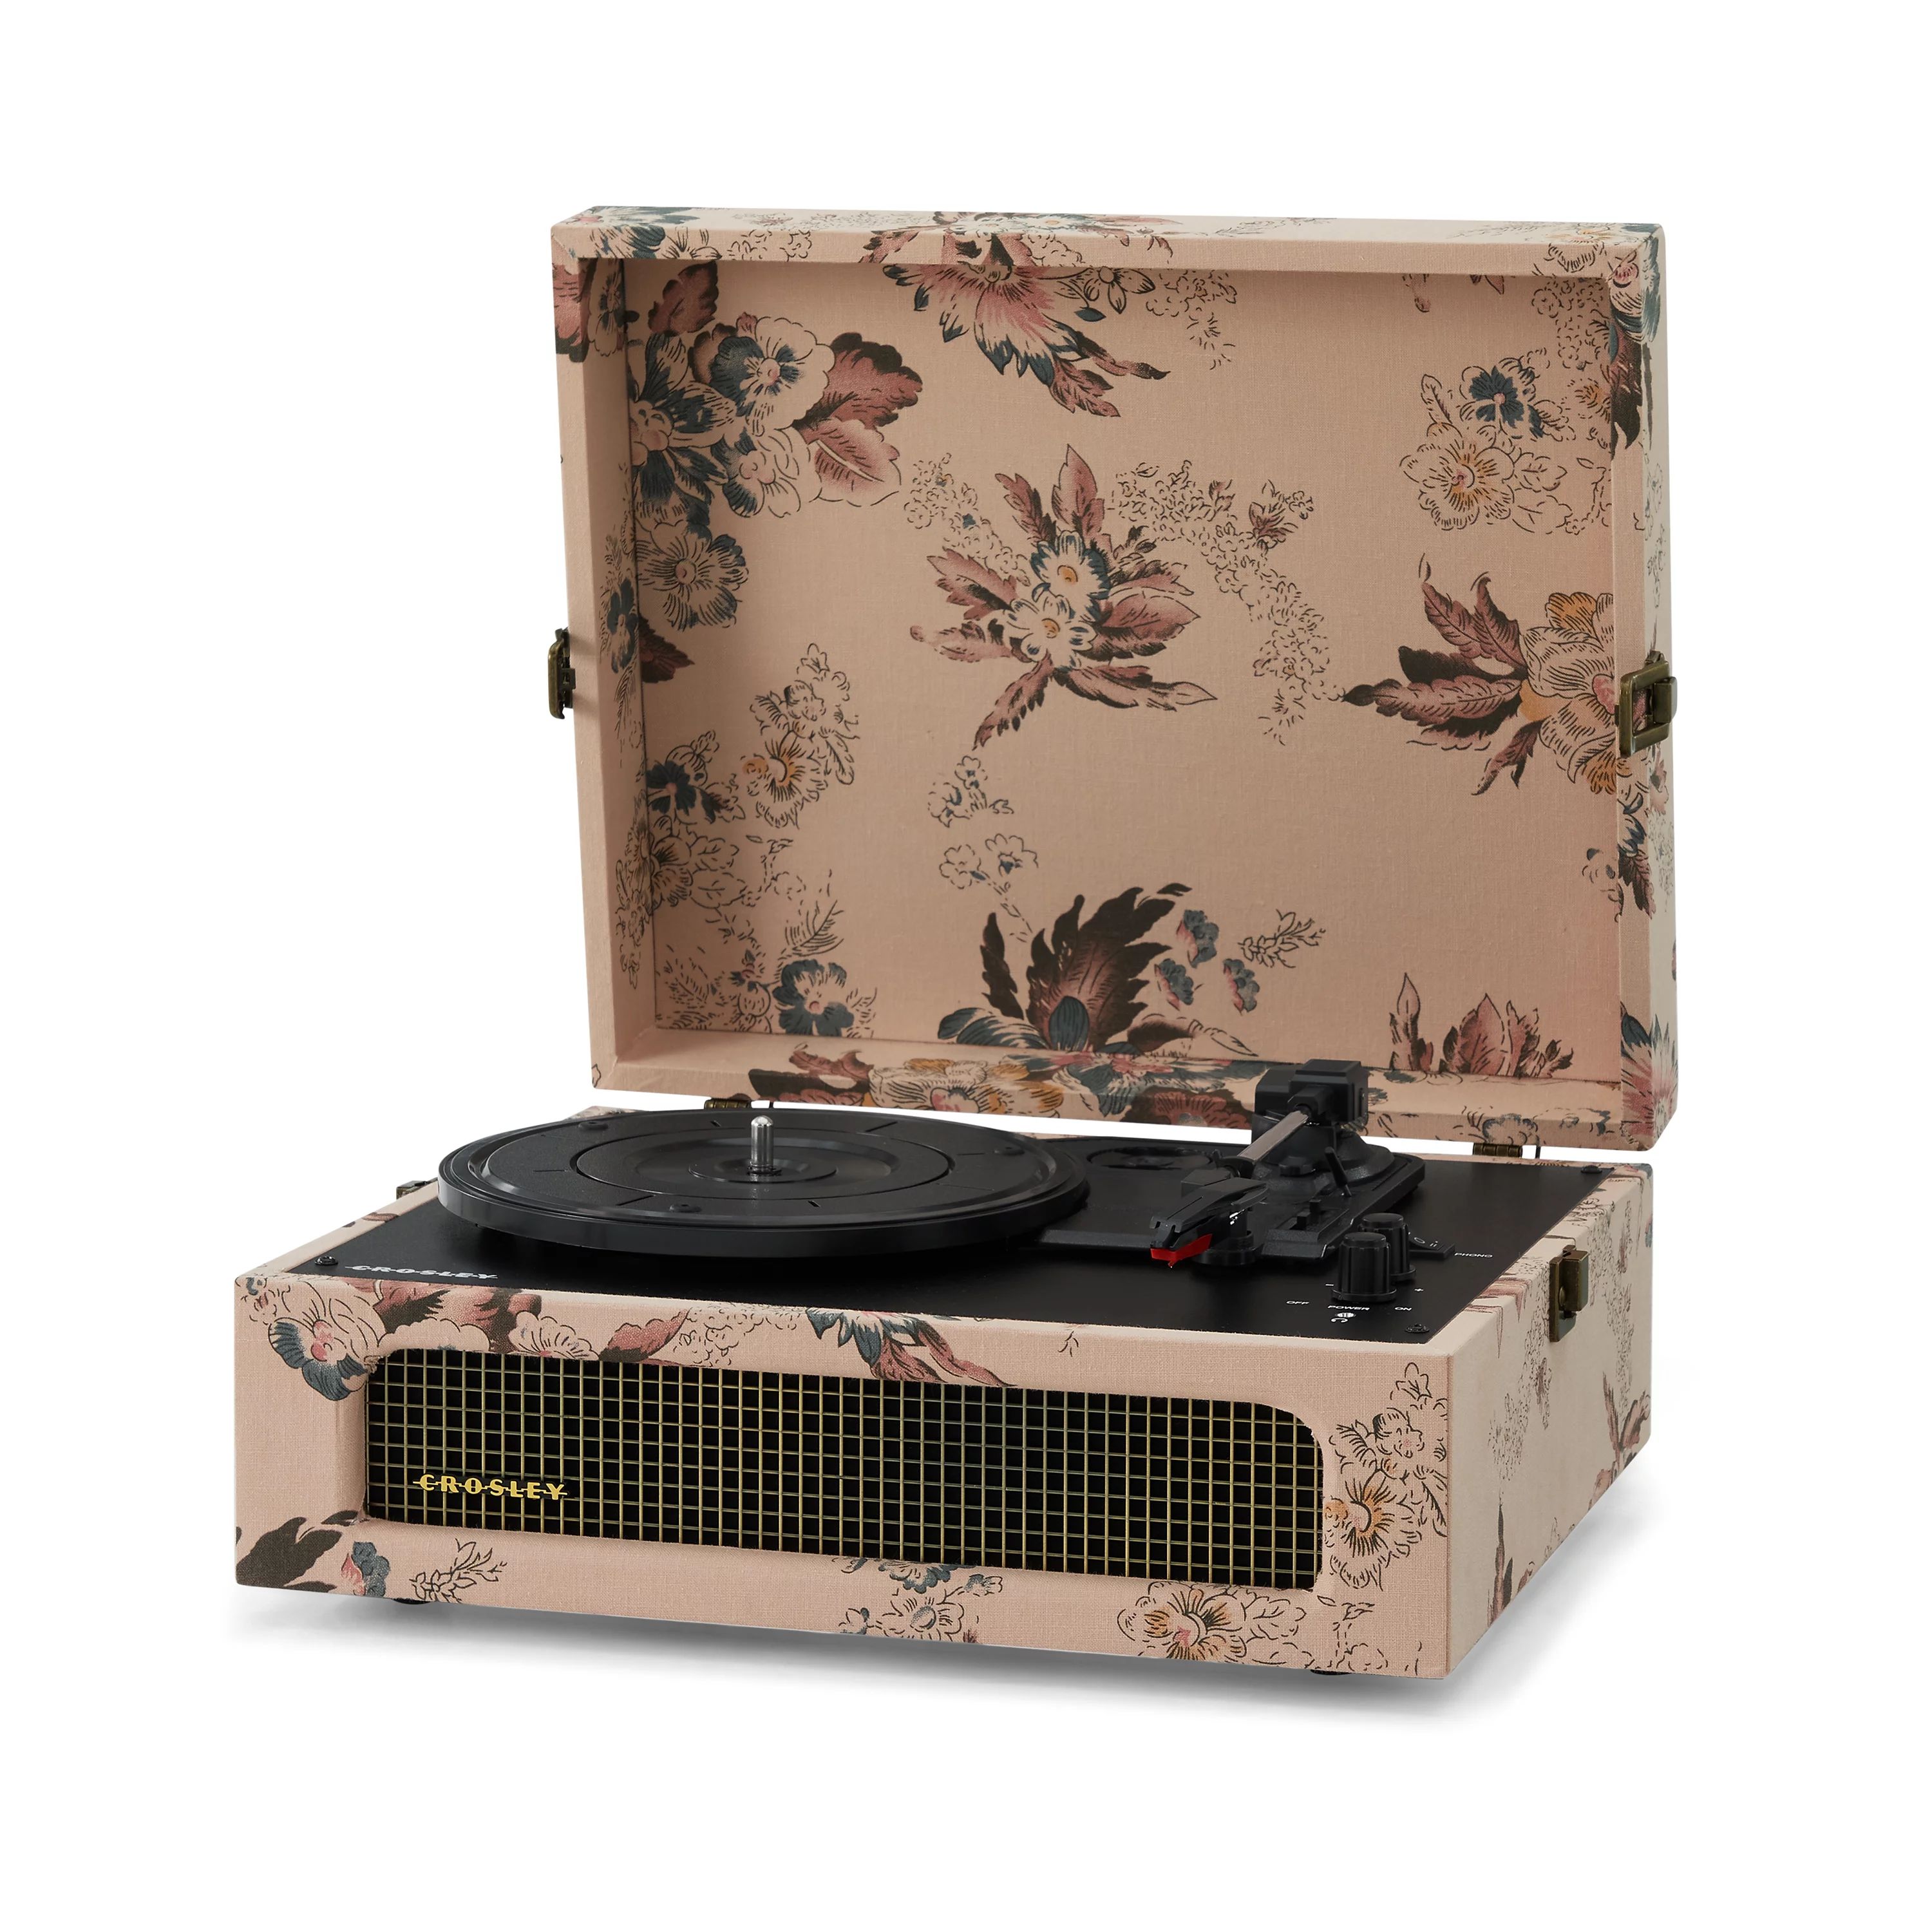 Crosley Voyager Vinyl Record Player with Speakers with wireless Bluetooth - Audio Turntables | Walmart (US)